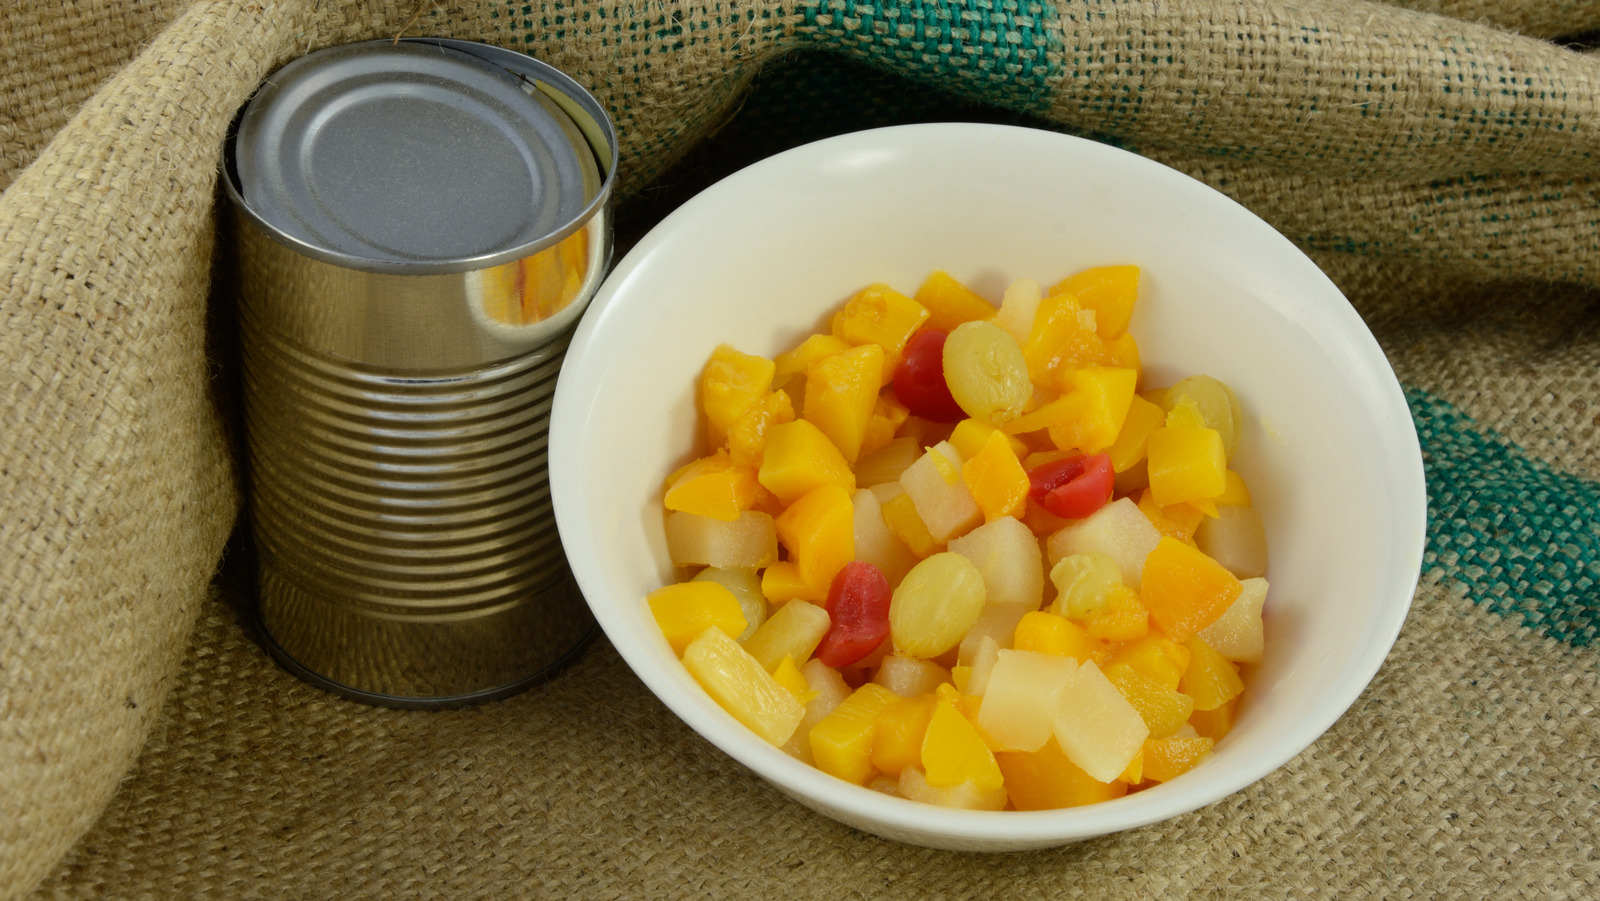 Tips on how to transform a humble tin can of food